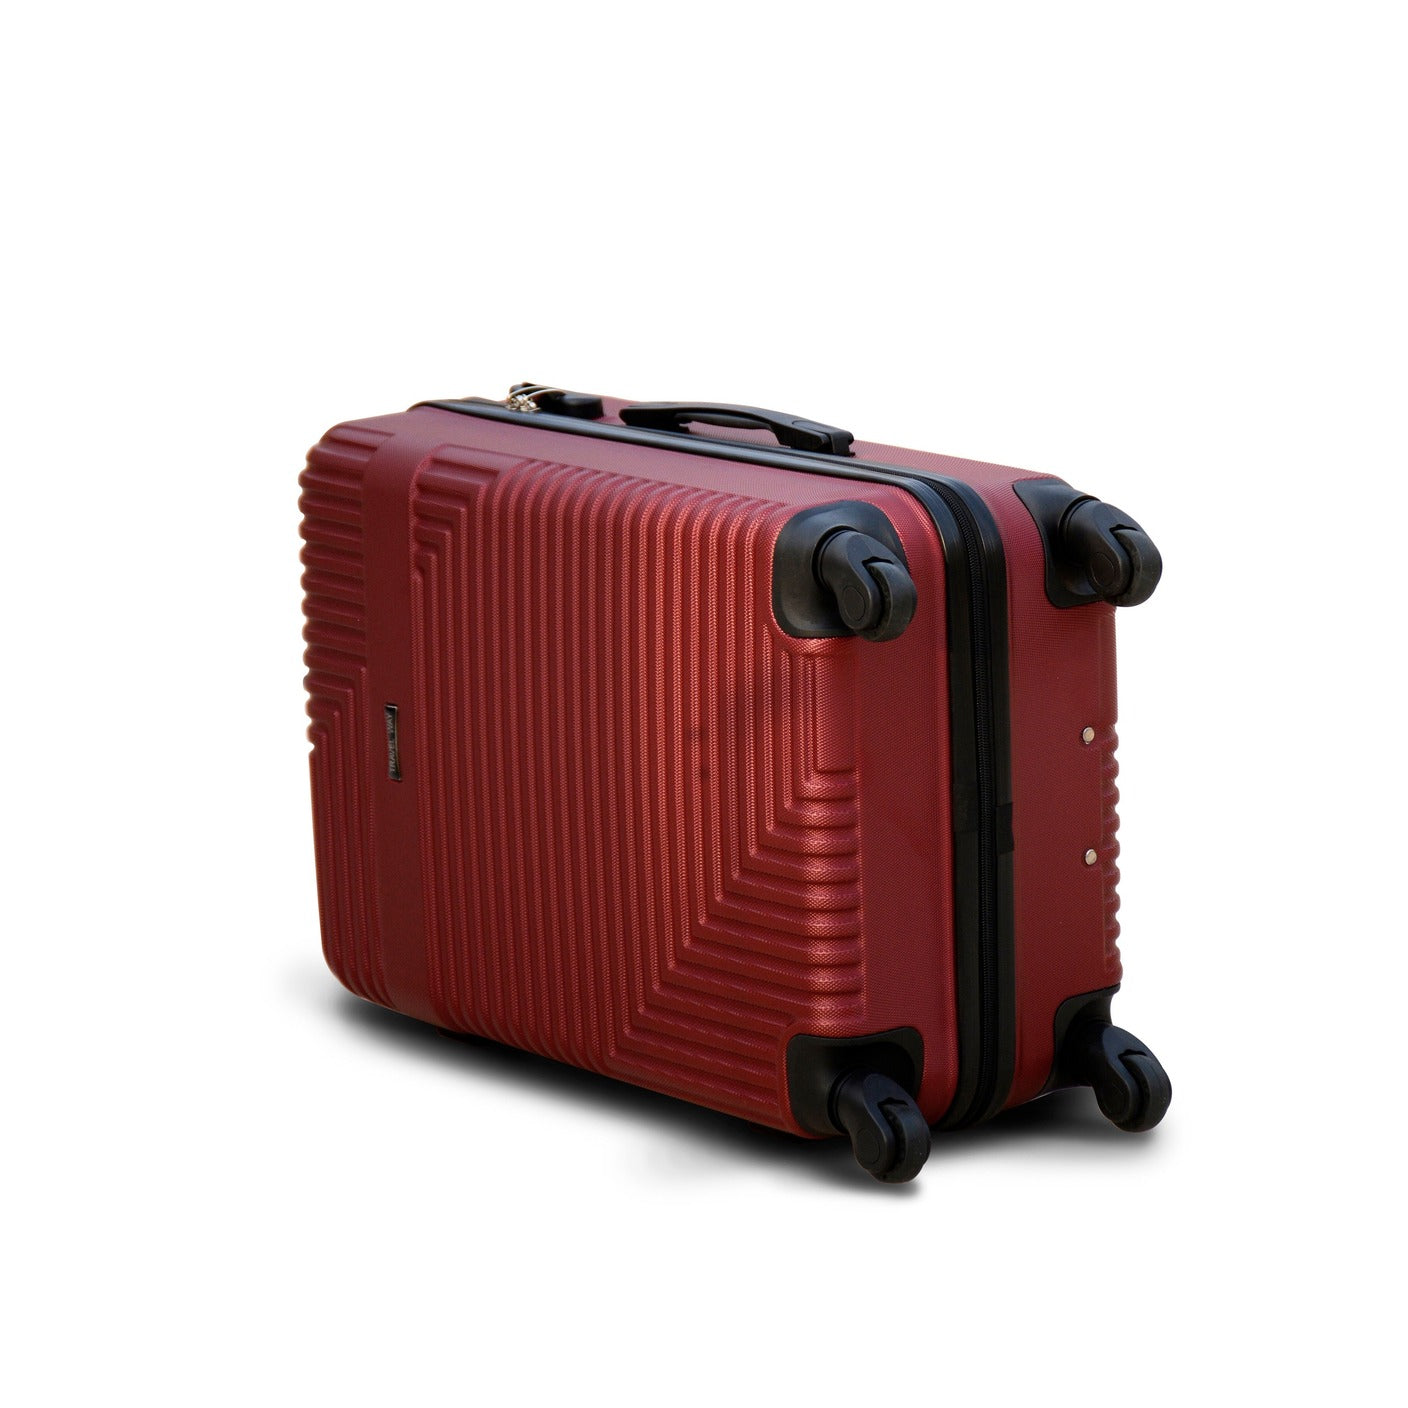 24" Red Colour Travel Way ABS Luggage Lightweight Hard Case Spinner Wheel Trolley Bag